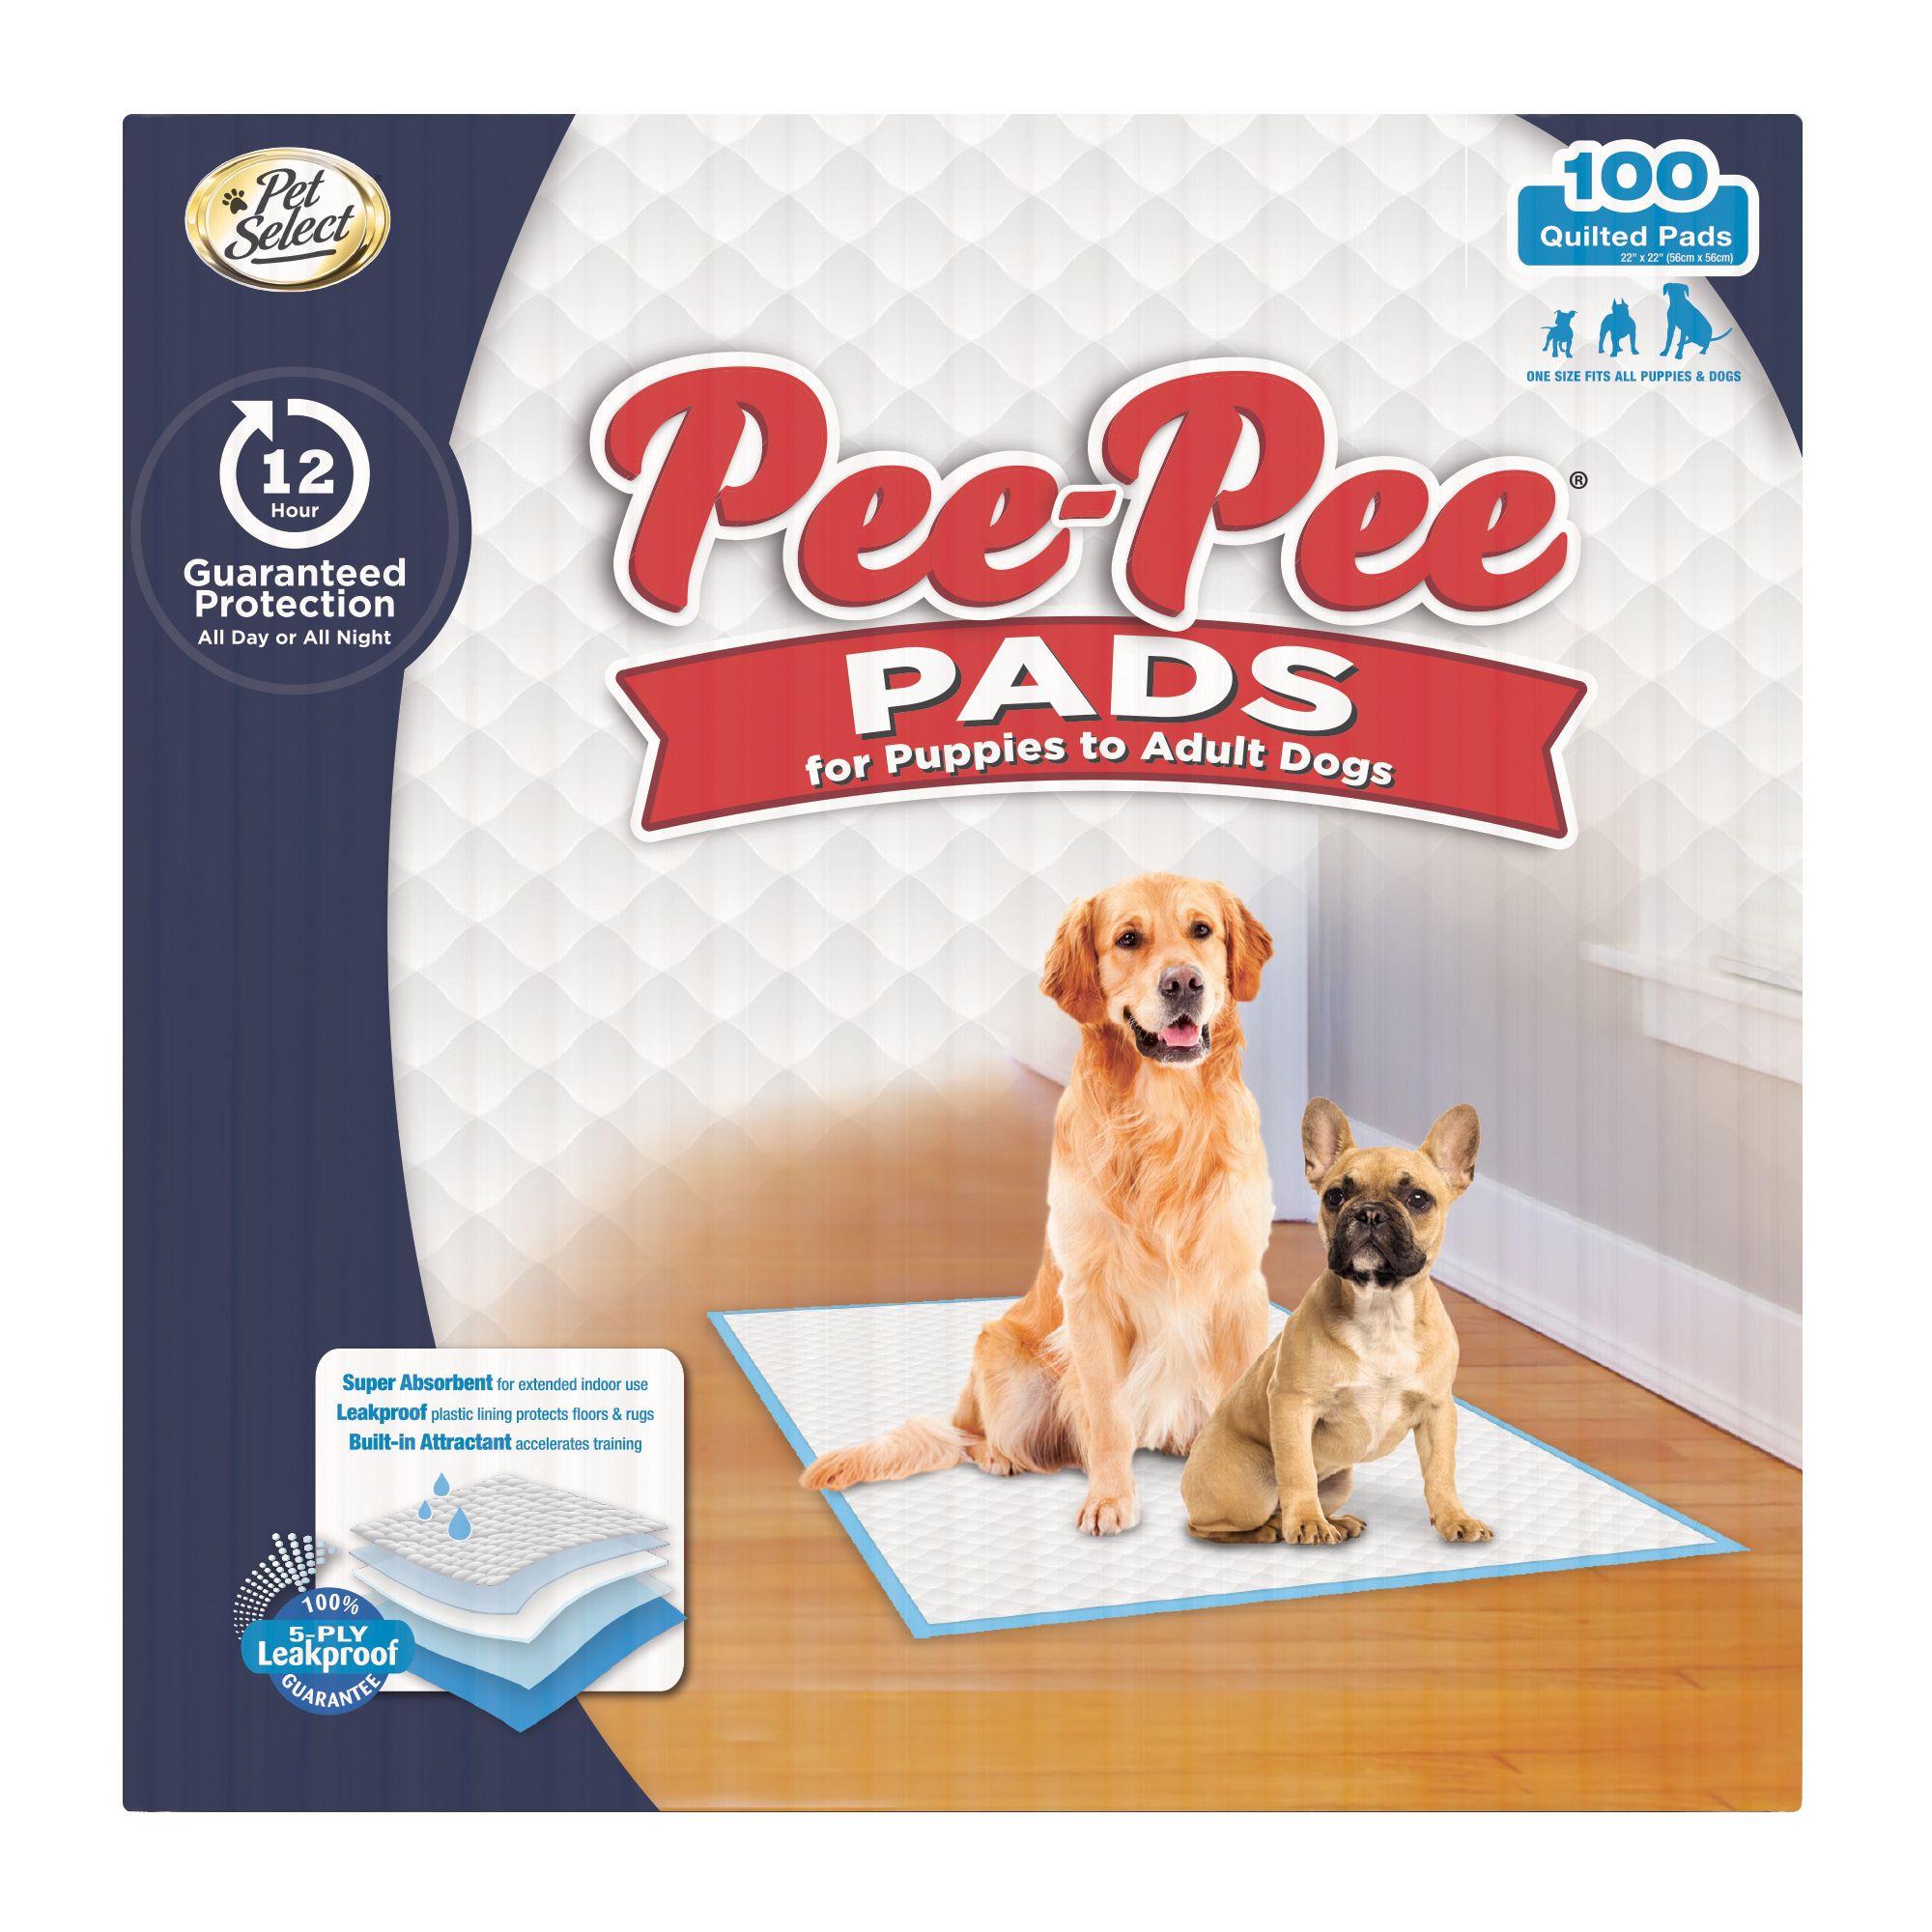 wee wee pads for adults